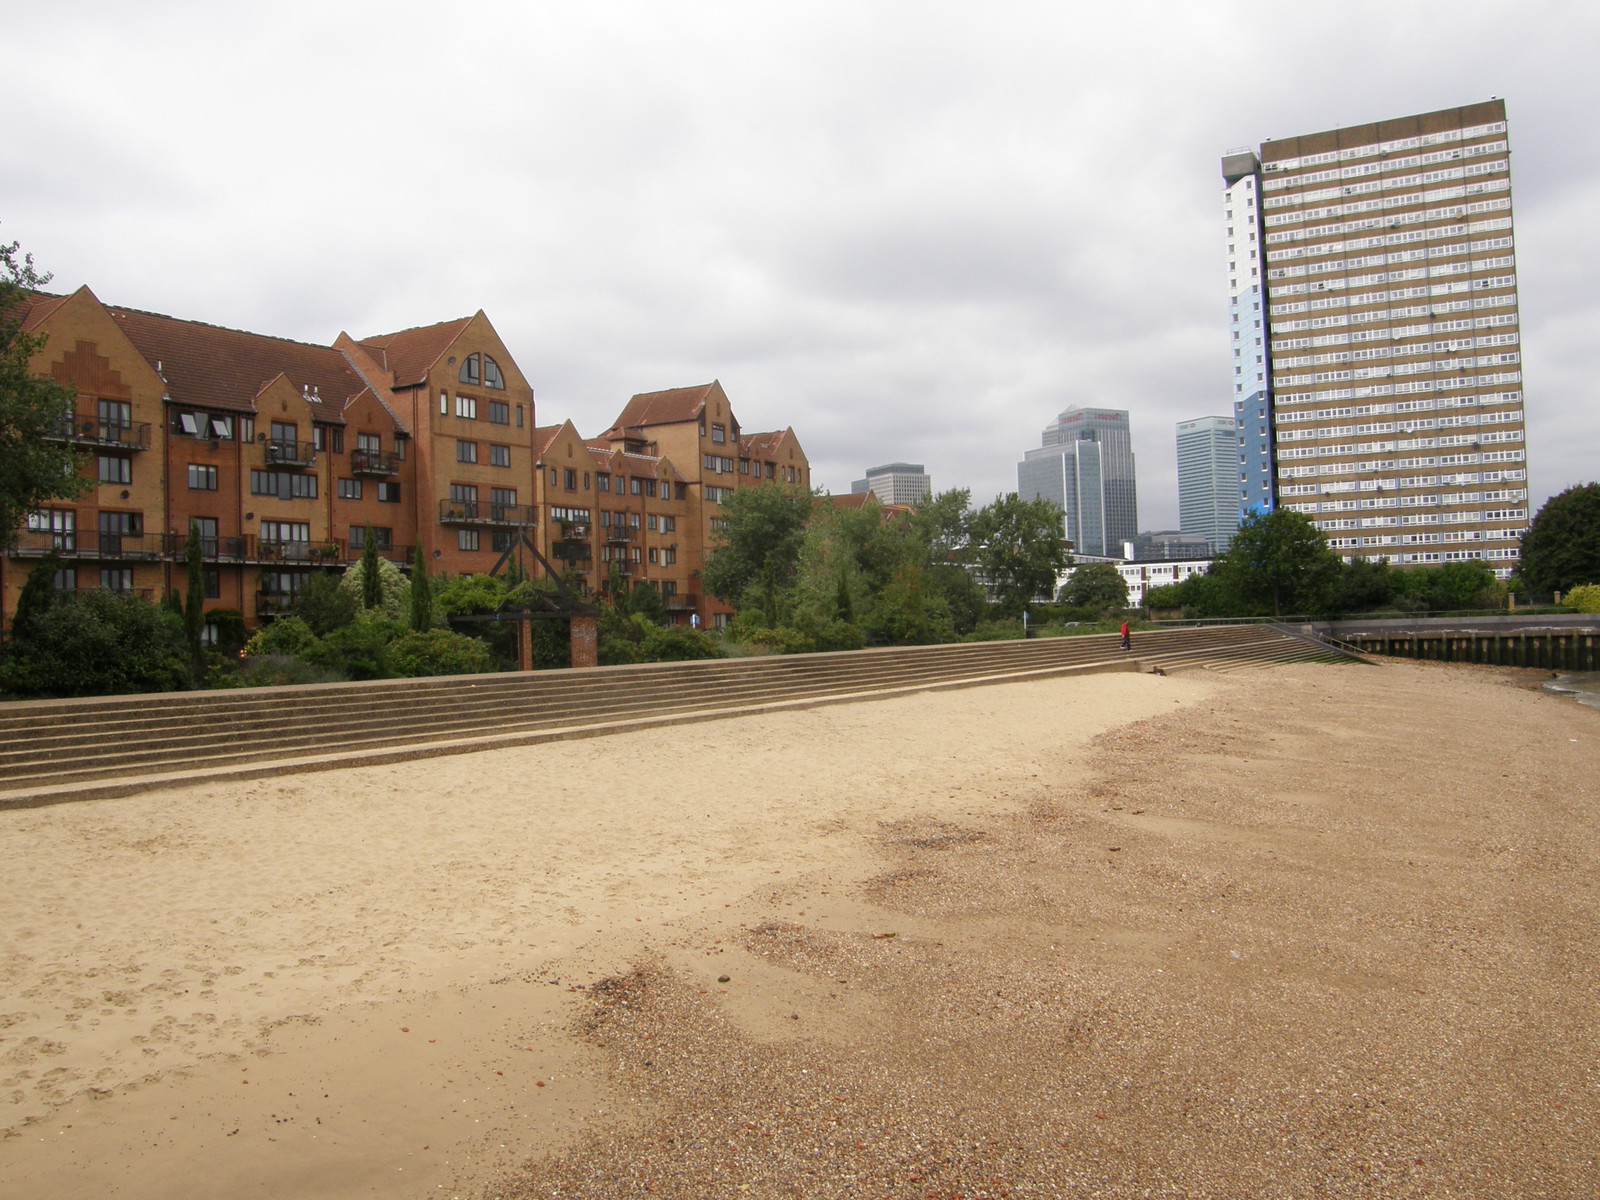 Image from Canada Water to North Greenwich